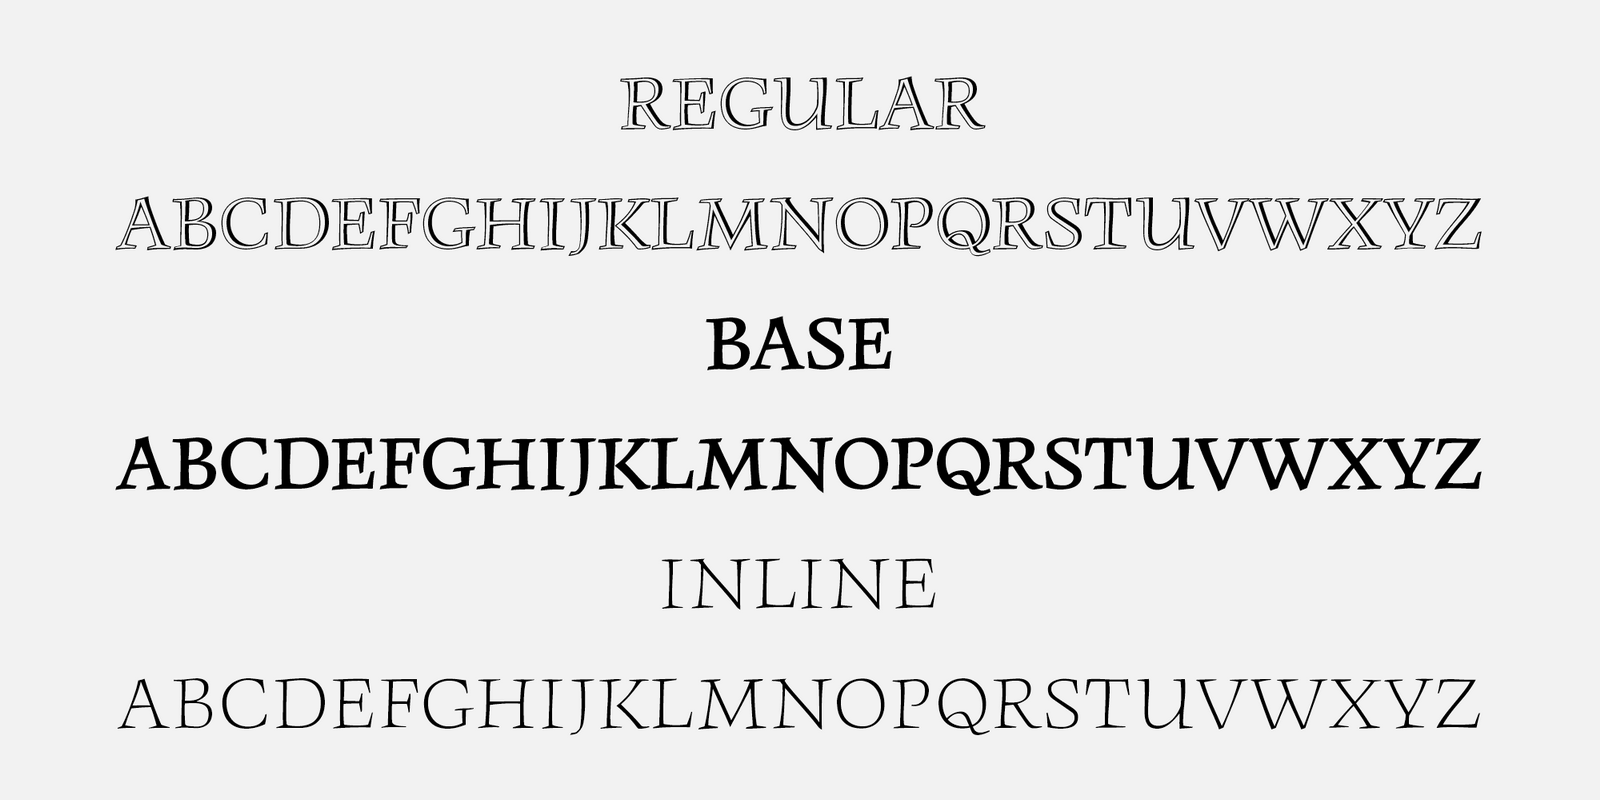 Monument’s three styles – Regular, Base and Inline – are interchangeable and can also be used as stand-alone fonts.